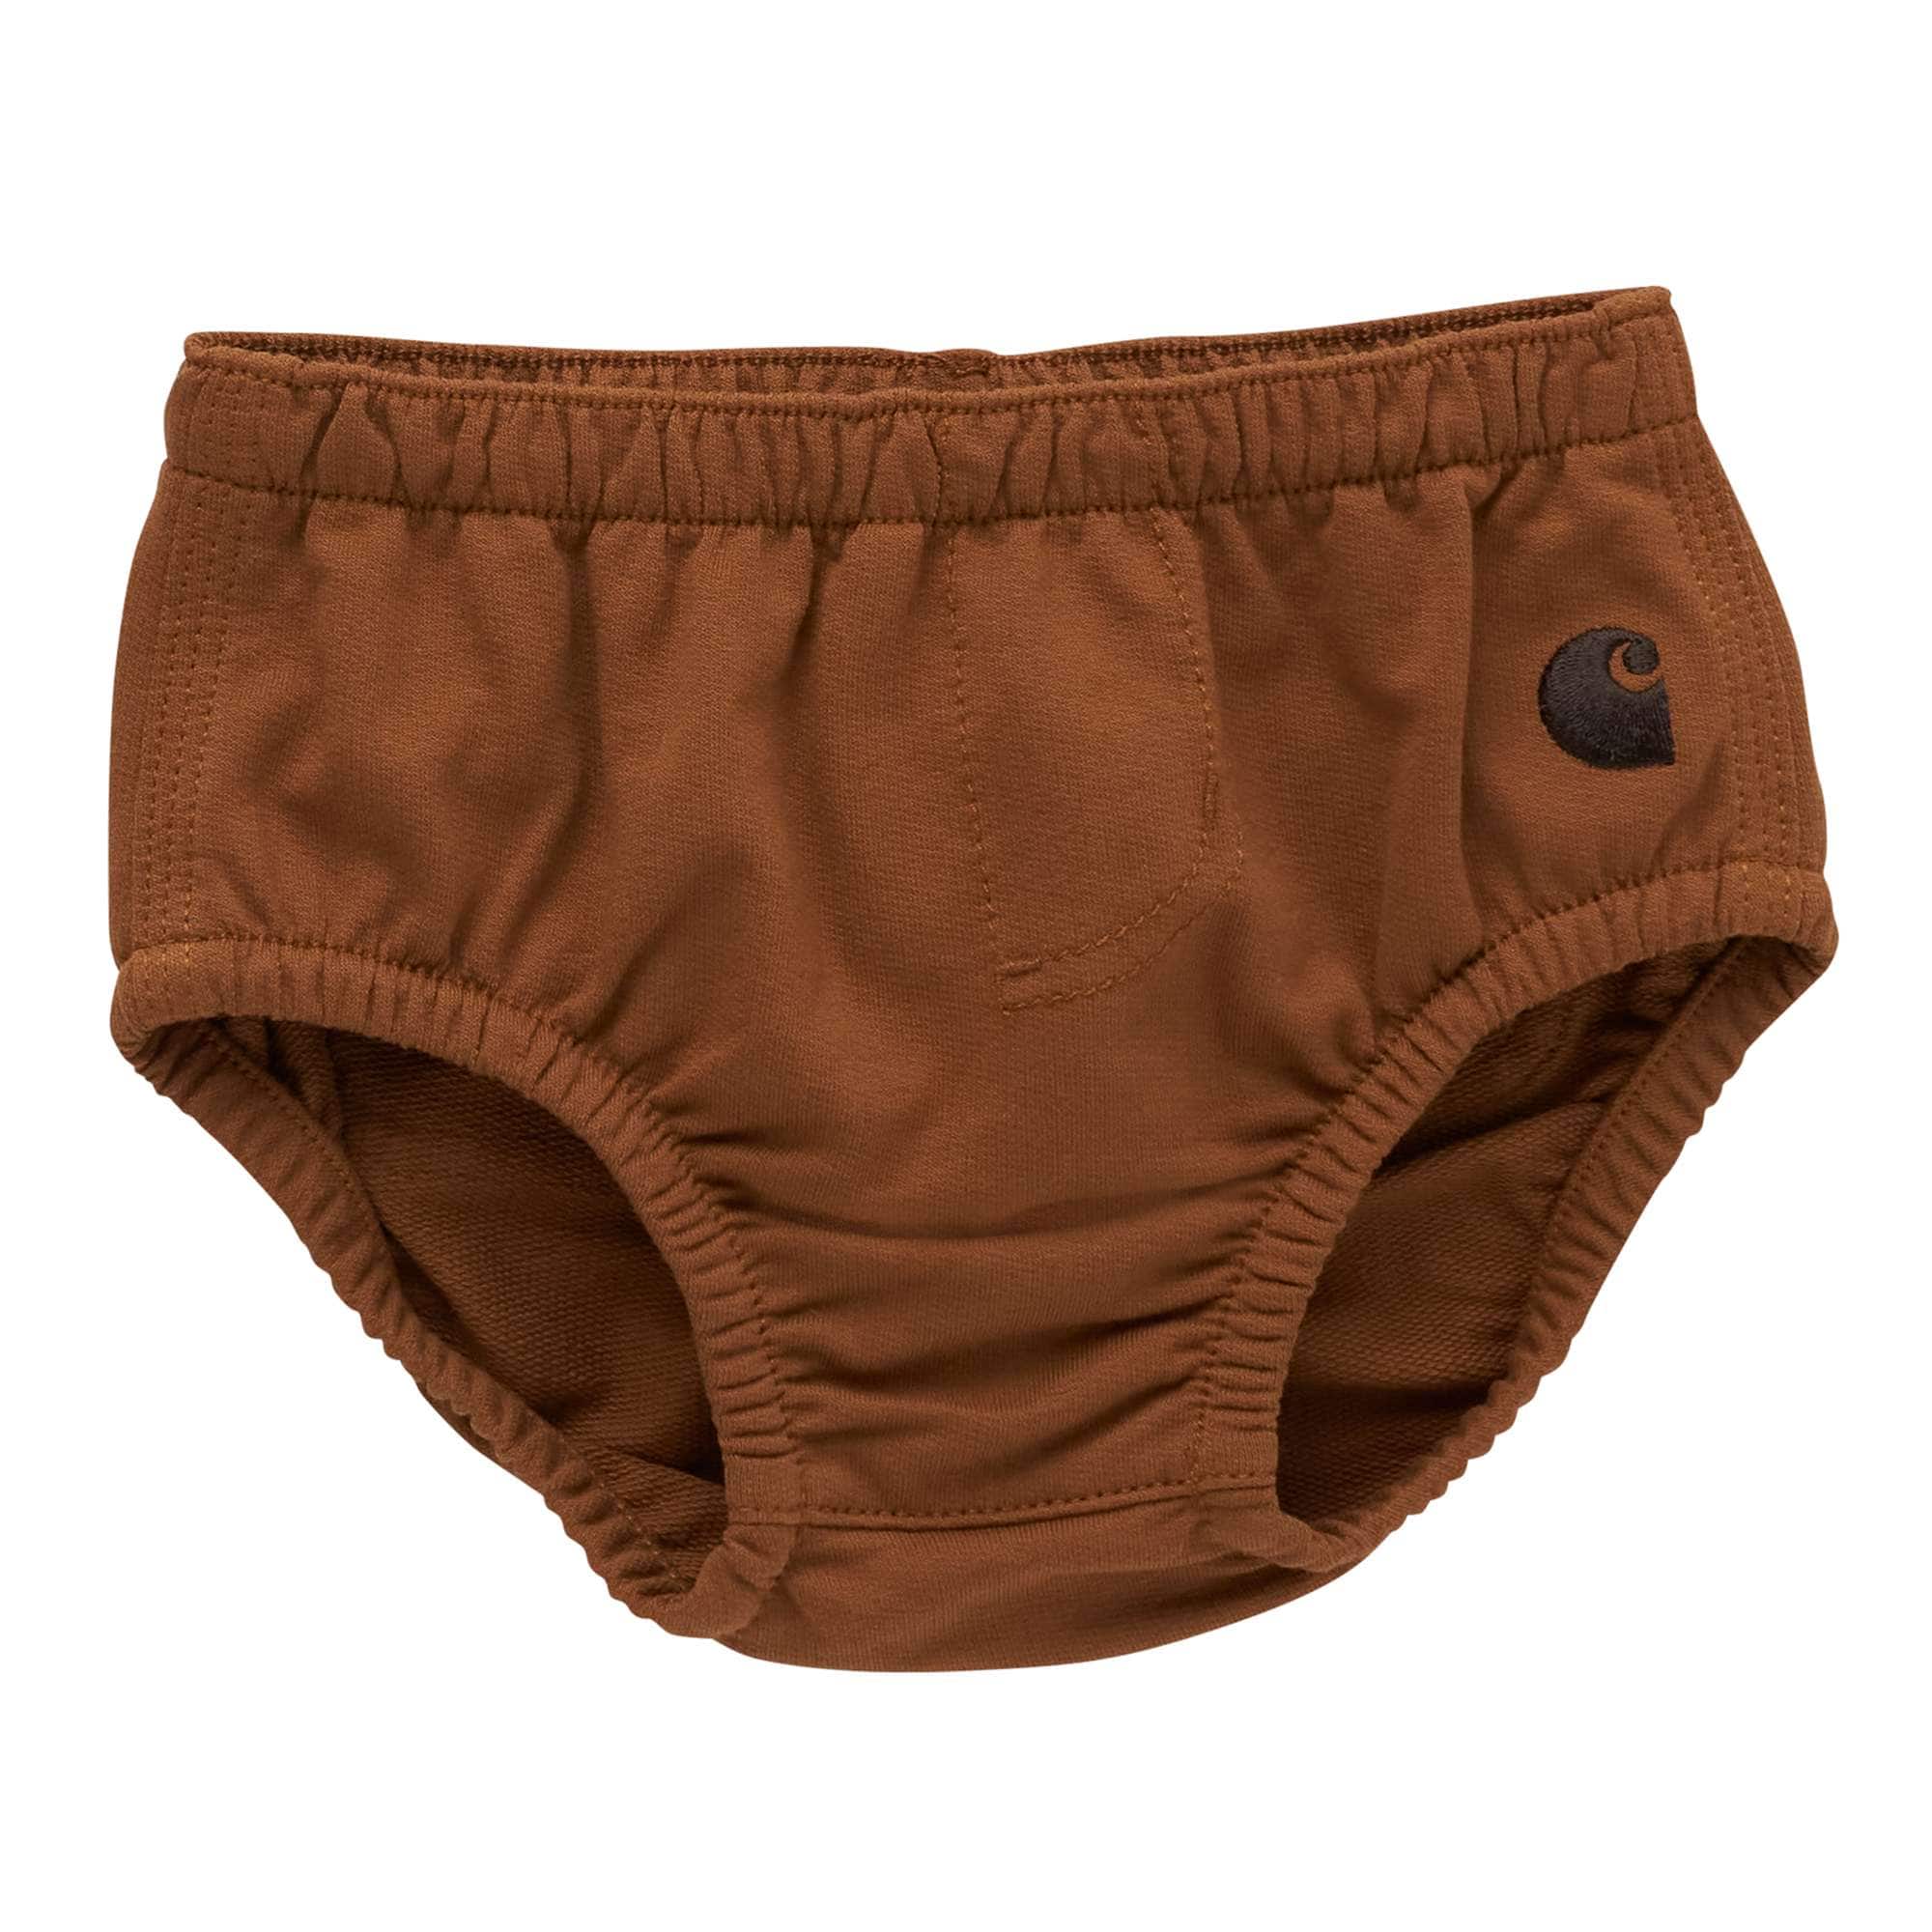 Kids' French Terry Diaper Cover (Infant)